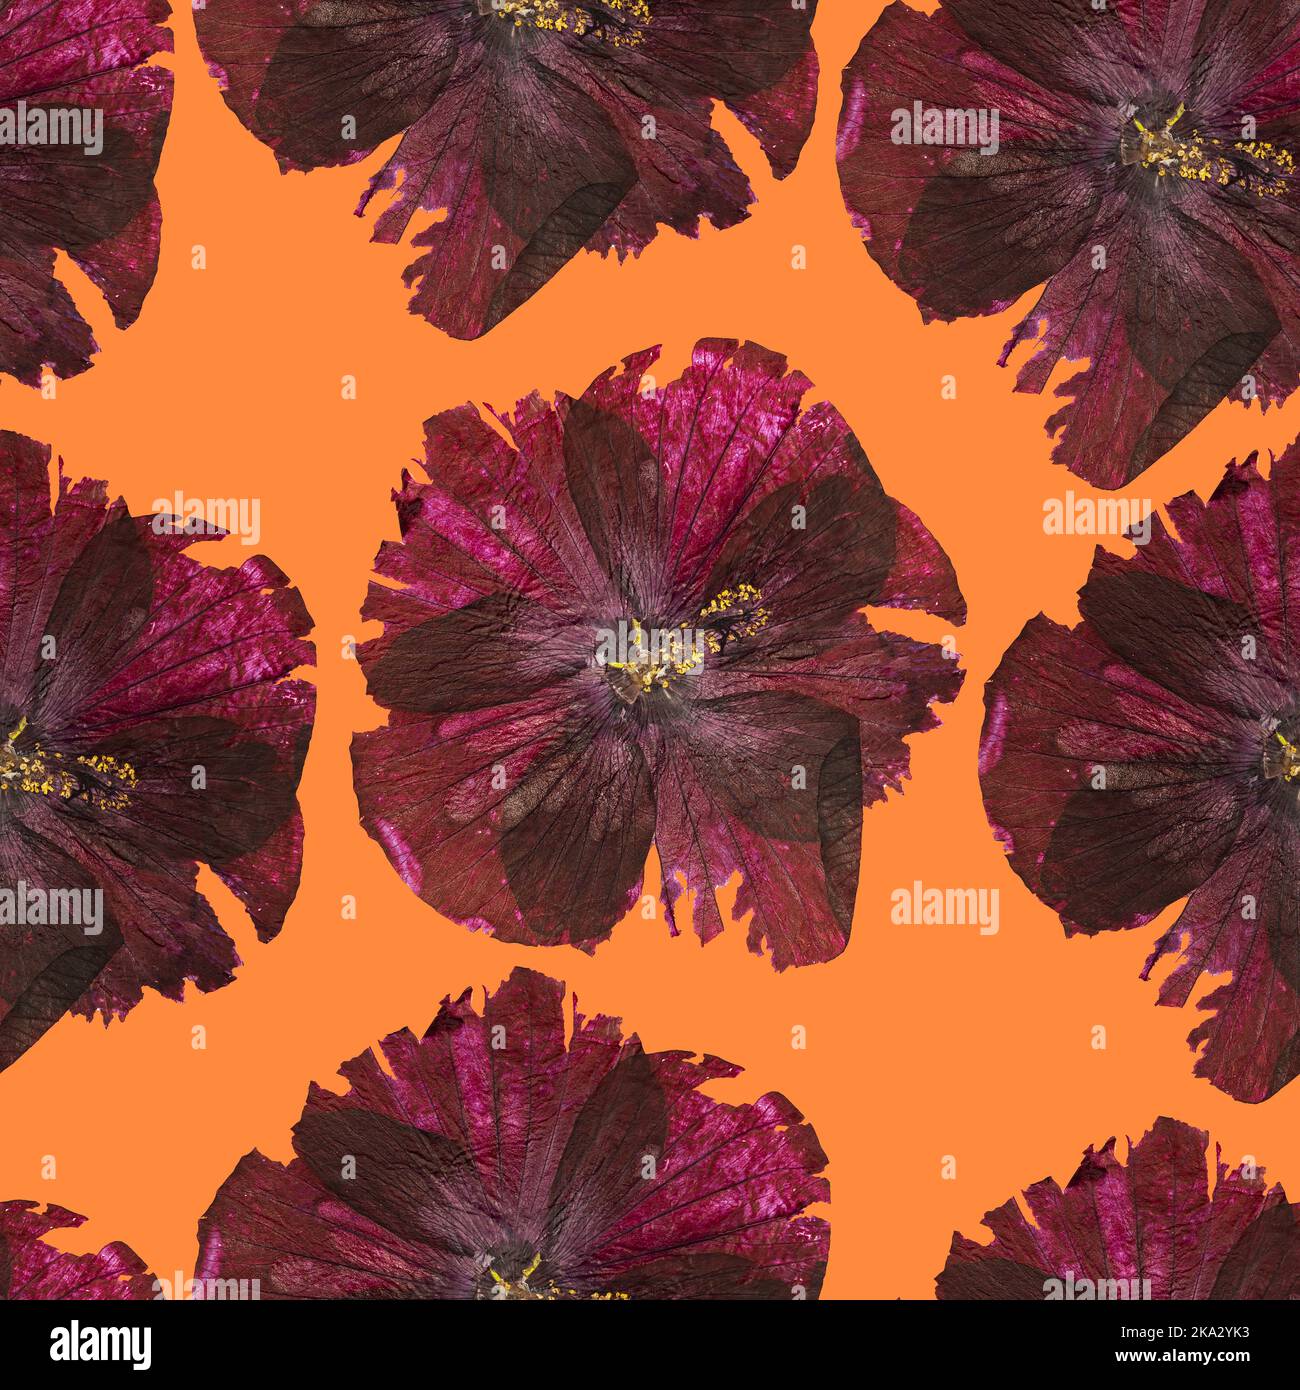 Seamless pattern of Hibiscus flowers on orange background. Minimalistic art for printing on fabric or wrapping paper. Stock Photo